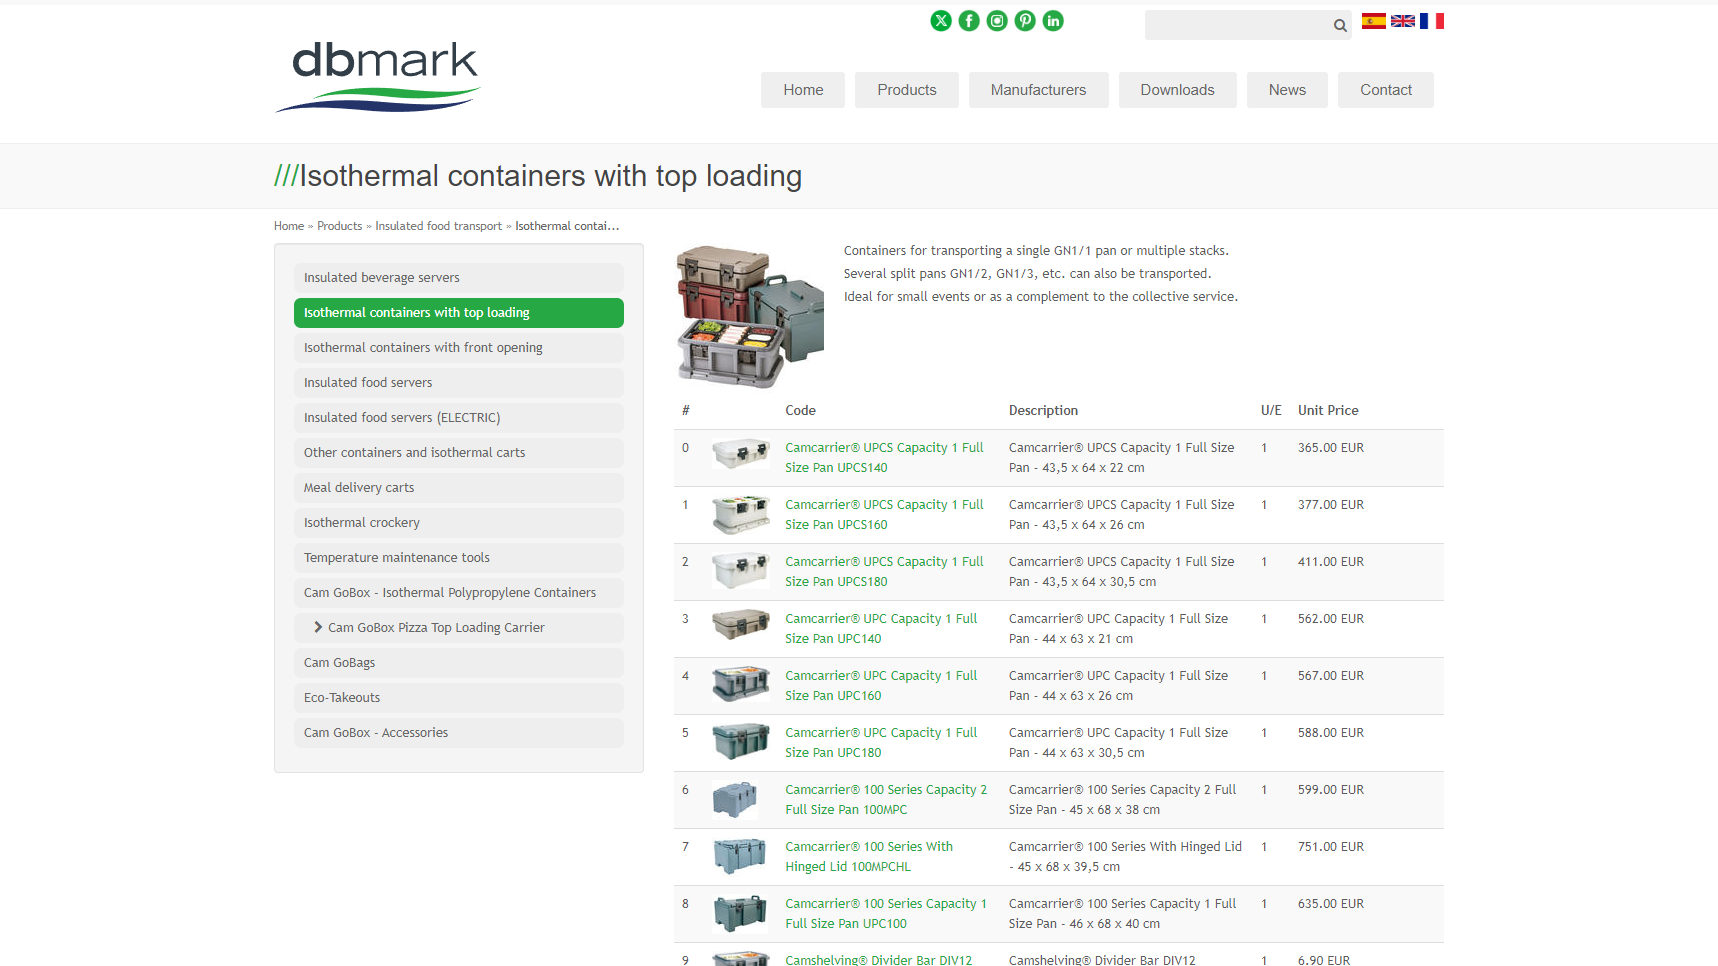 DBMark - Isothermal Catering Packaging Manufacturer